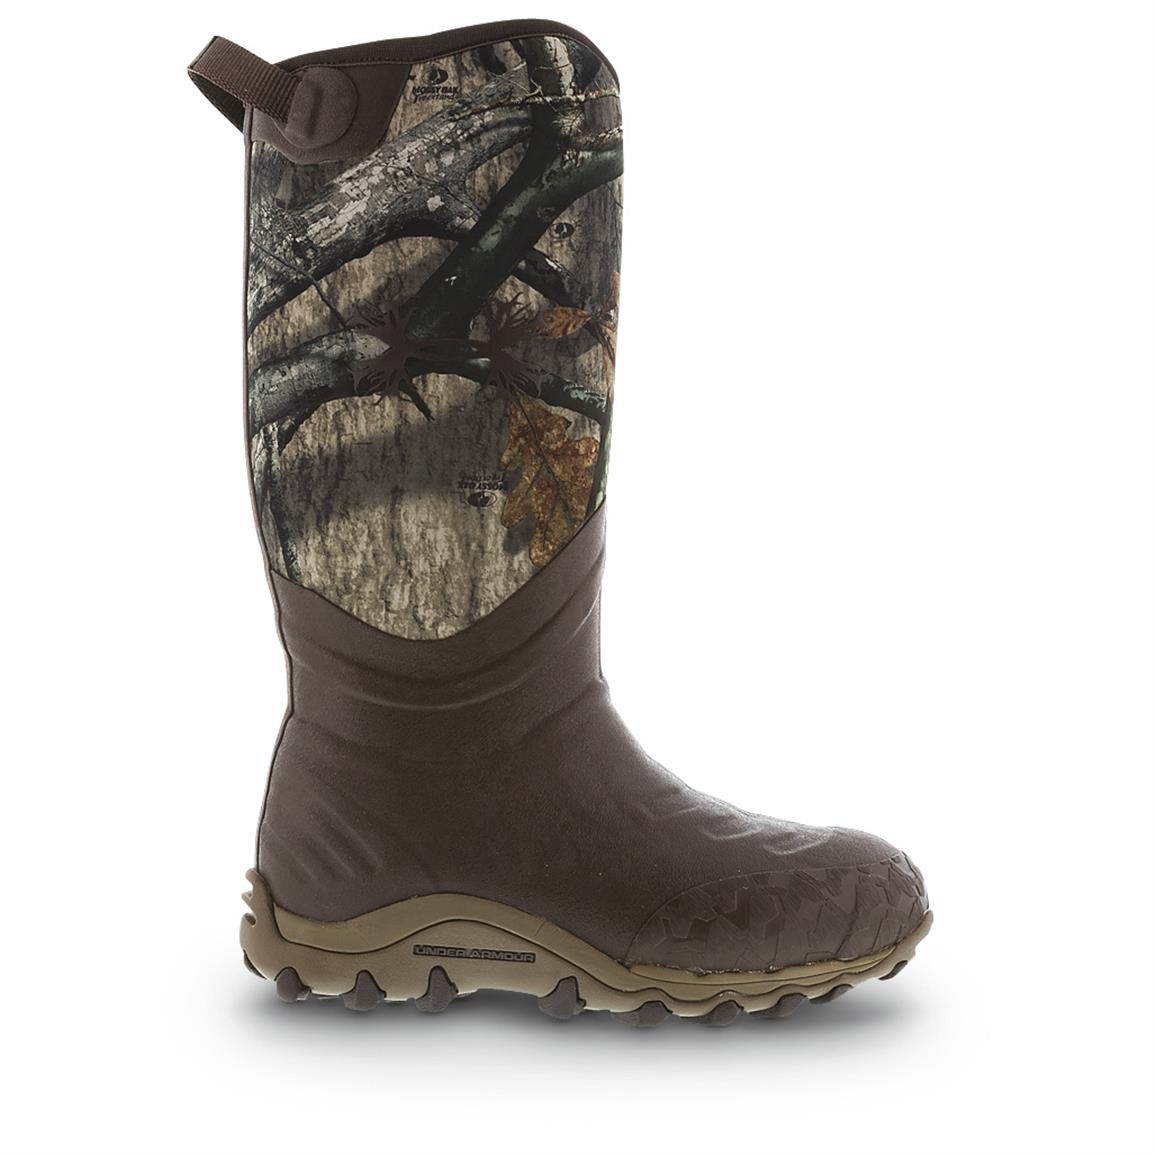 Men's Under Armour H.A.W. 800 gram PrimaLoft Insulation Waterproof Rubber Hunting Boots, Mossy Oak Treestand® / Timber